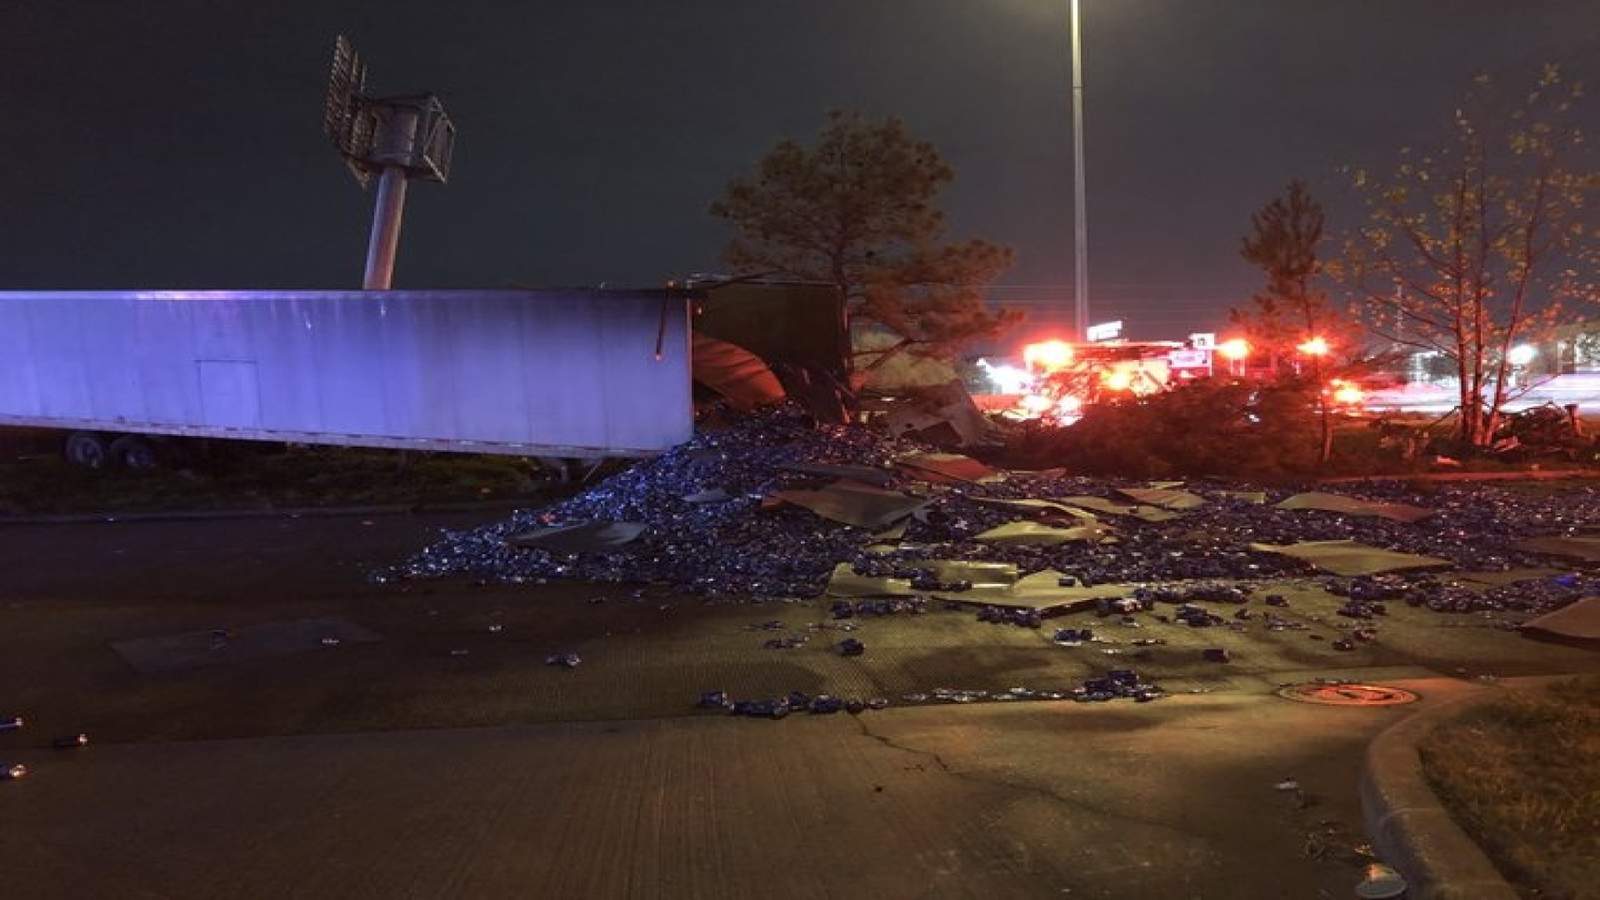 Driver of 18-wheeler killed, load of empty beer cans spilled on North Freeway